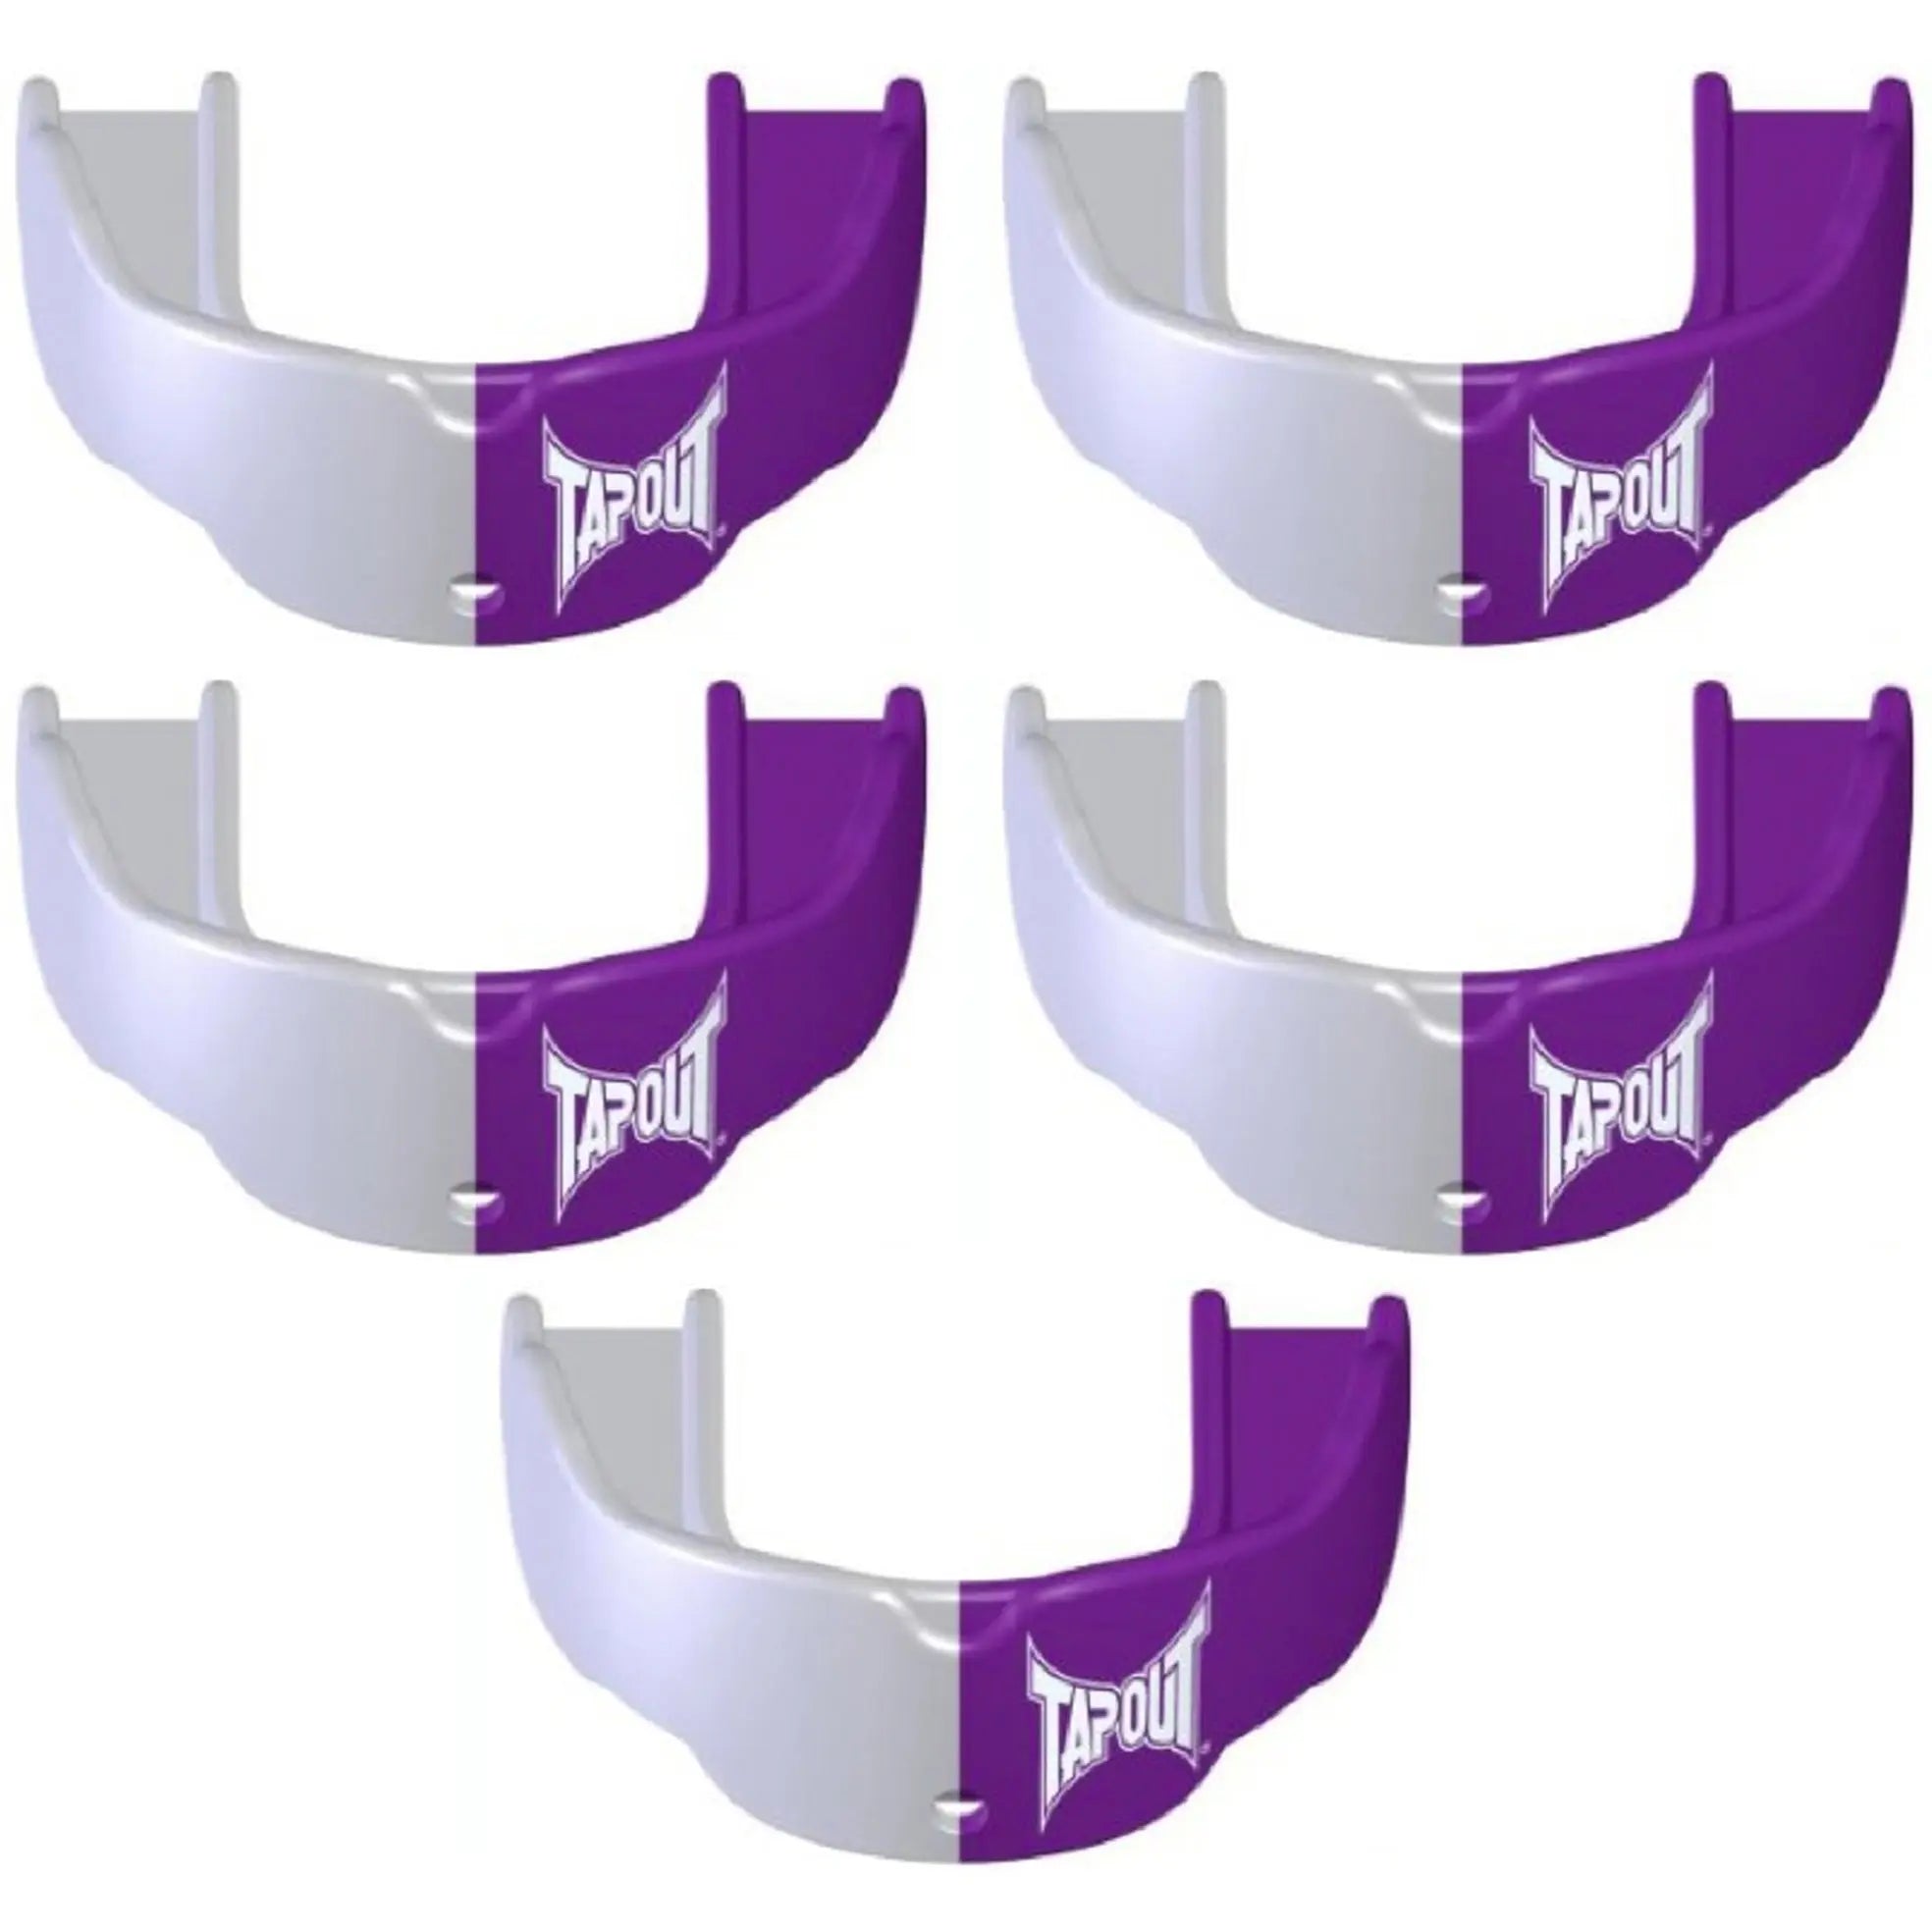 Tapout Youth Protective Sports Mouthguard with Strap 5-Pack - Purple/White Tapout